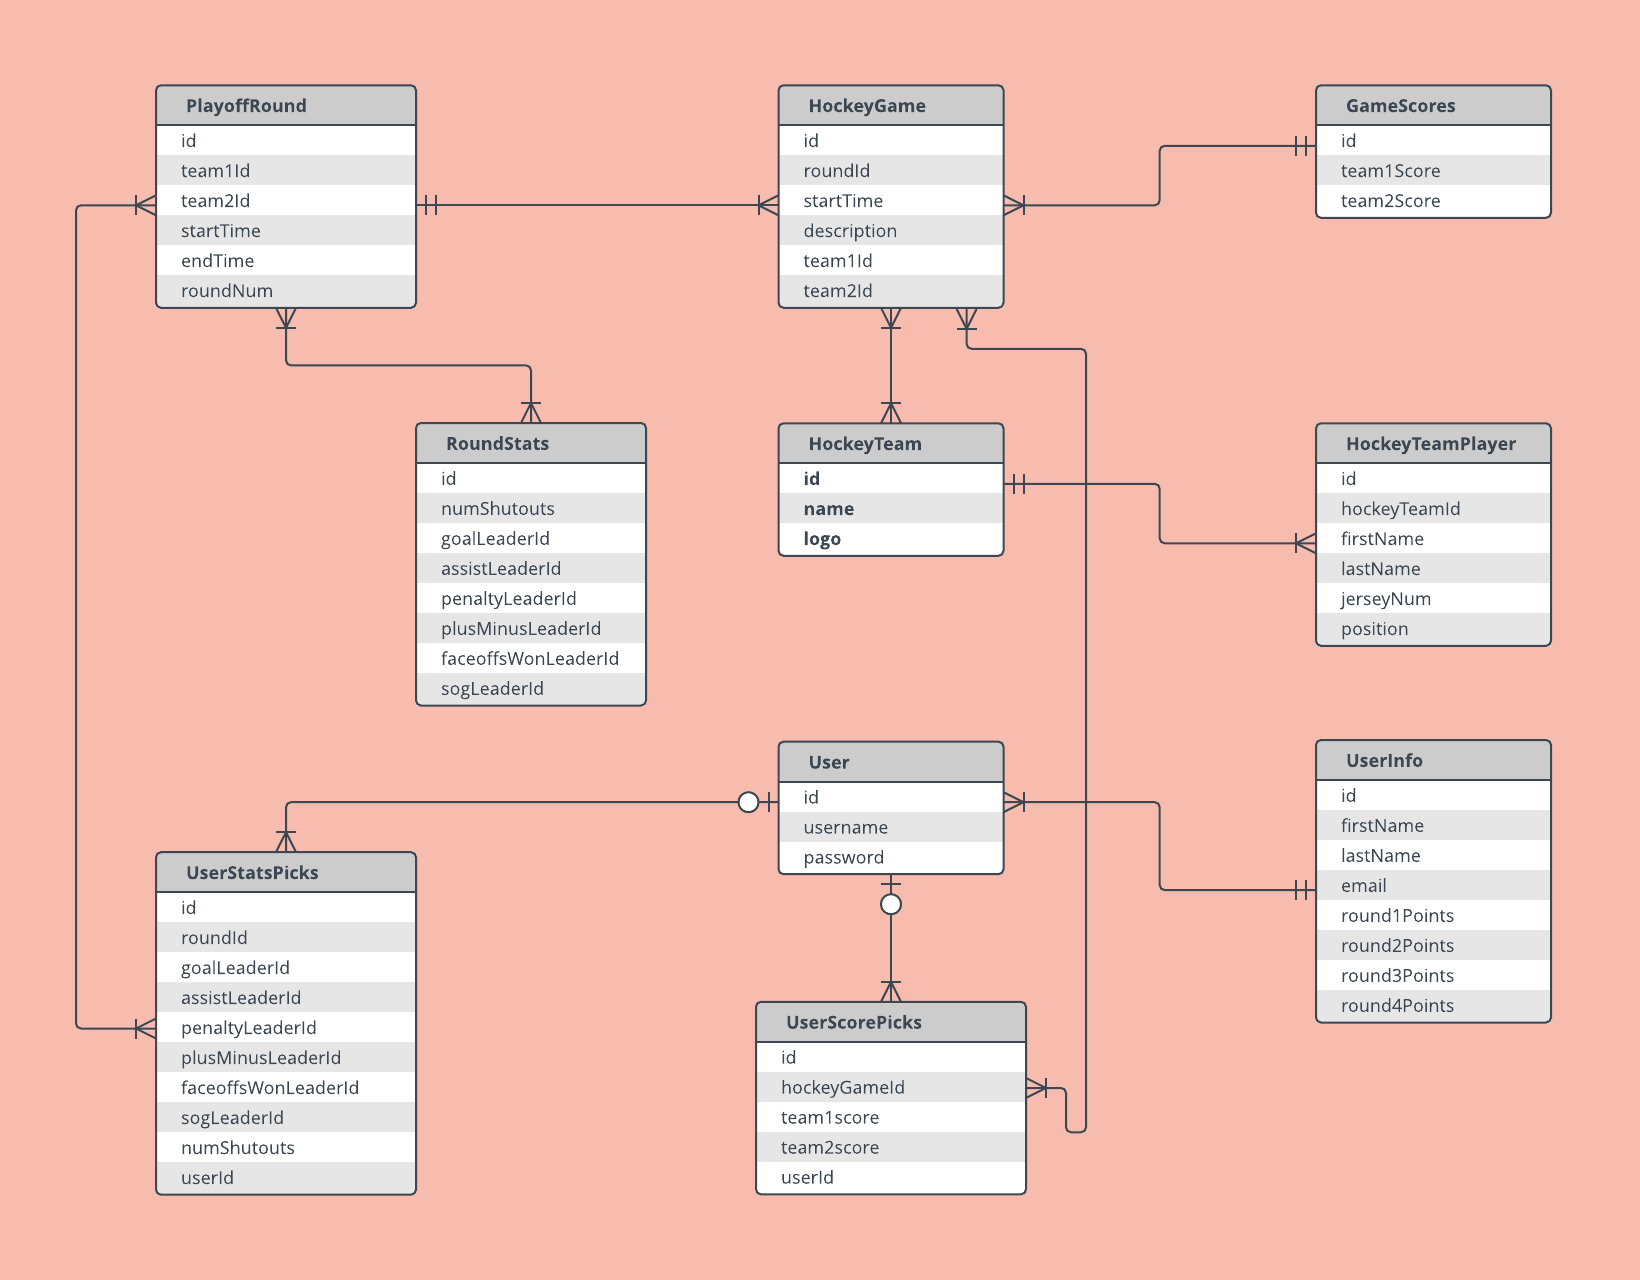 Er Diagram Examples And Templates | Lucidchart with regard to Simple Er Diagram Examples